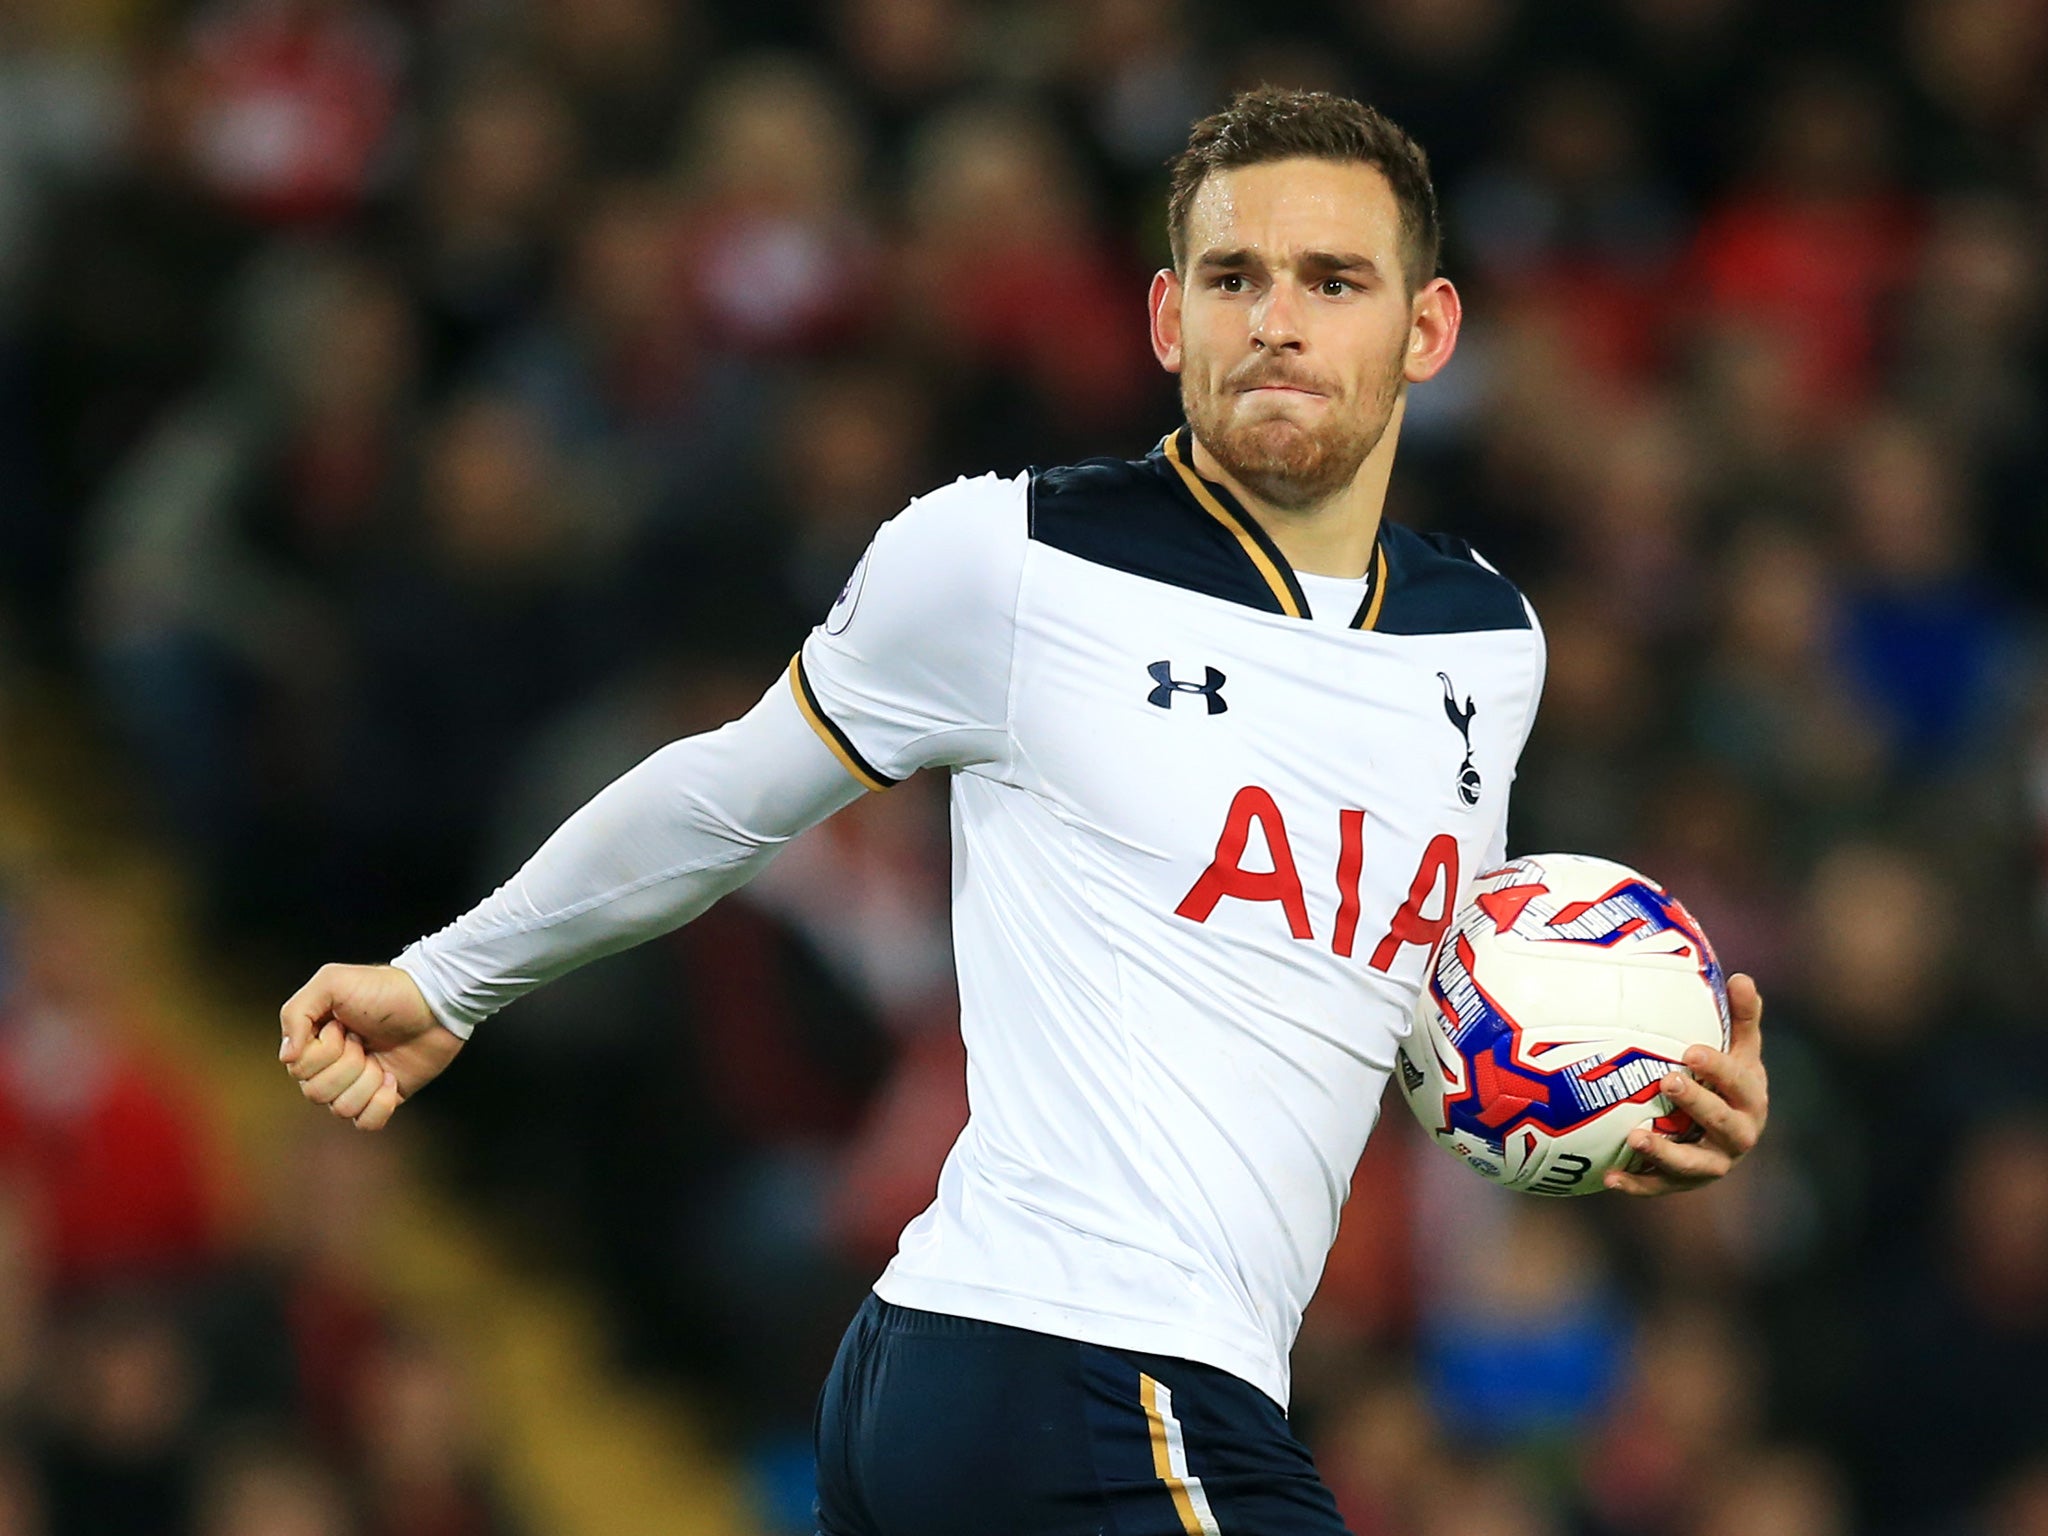 Janssen scored from the spot at Anfield after missing several chances